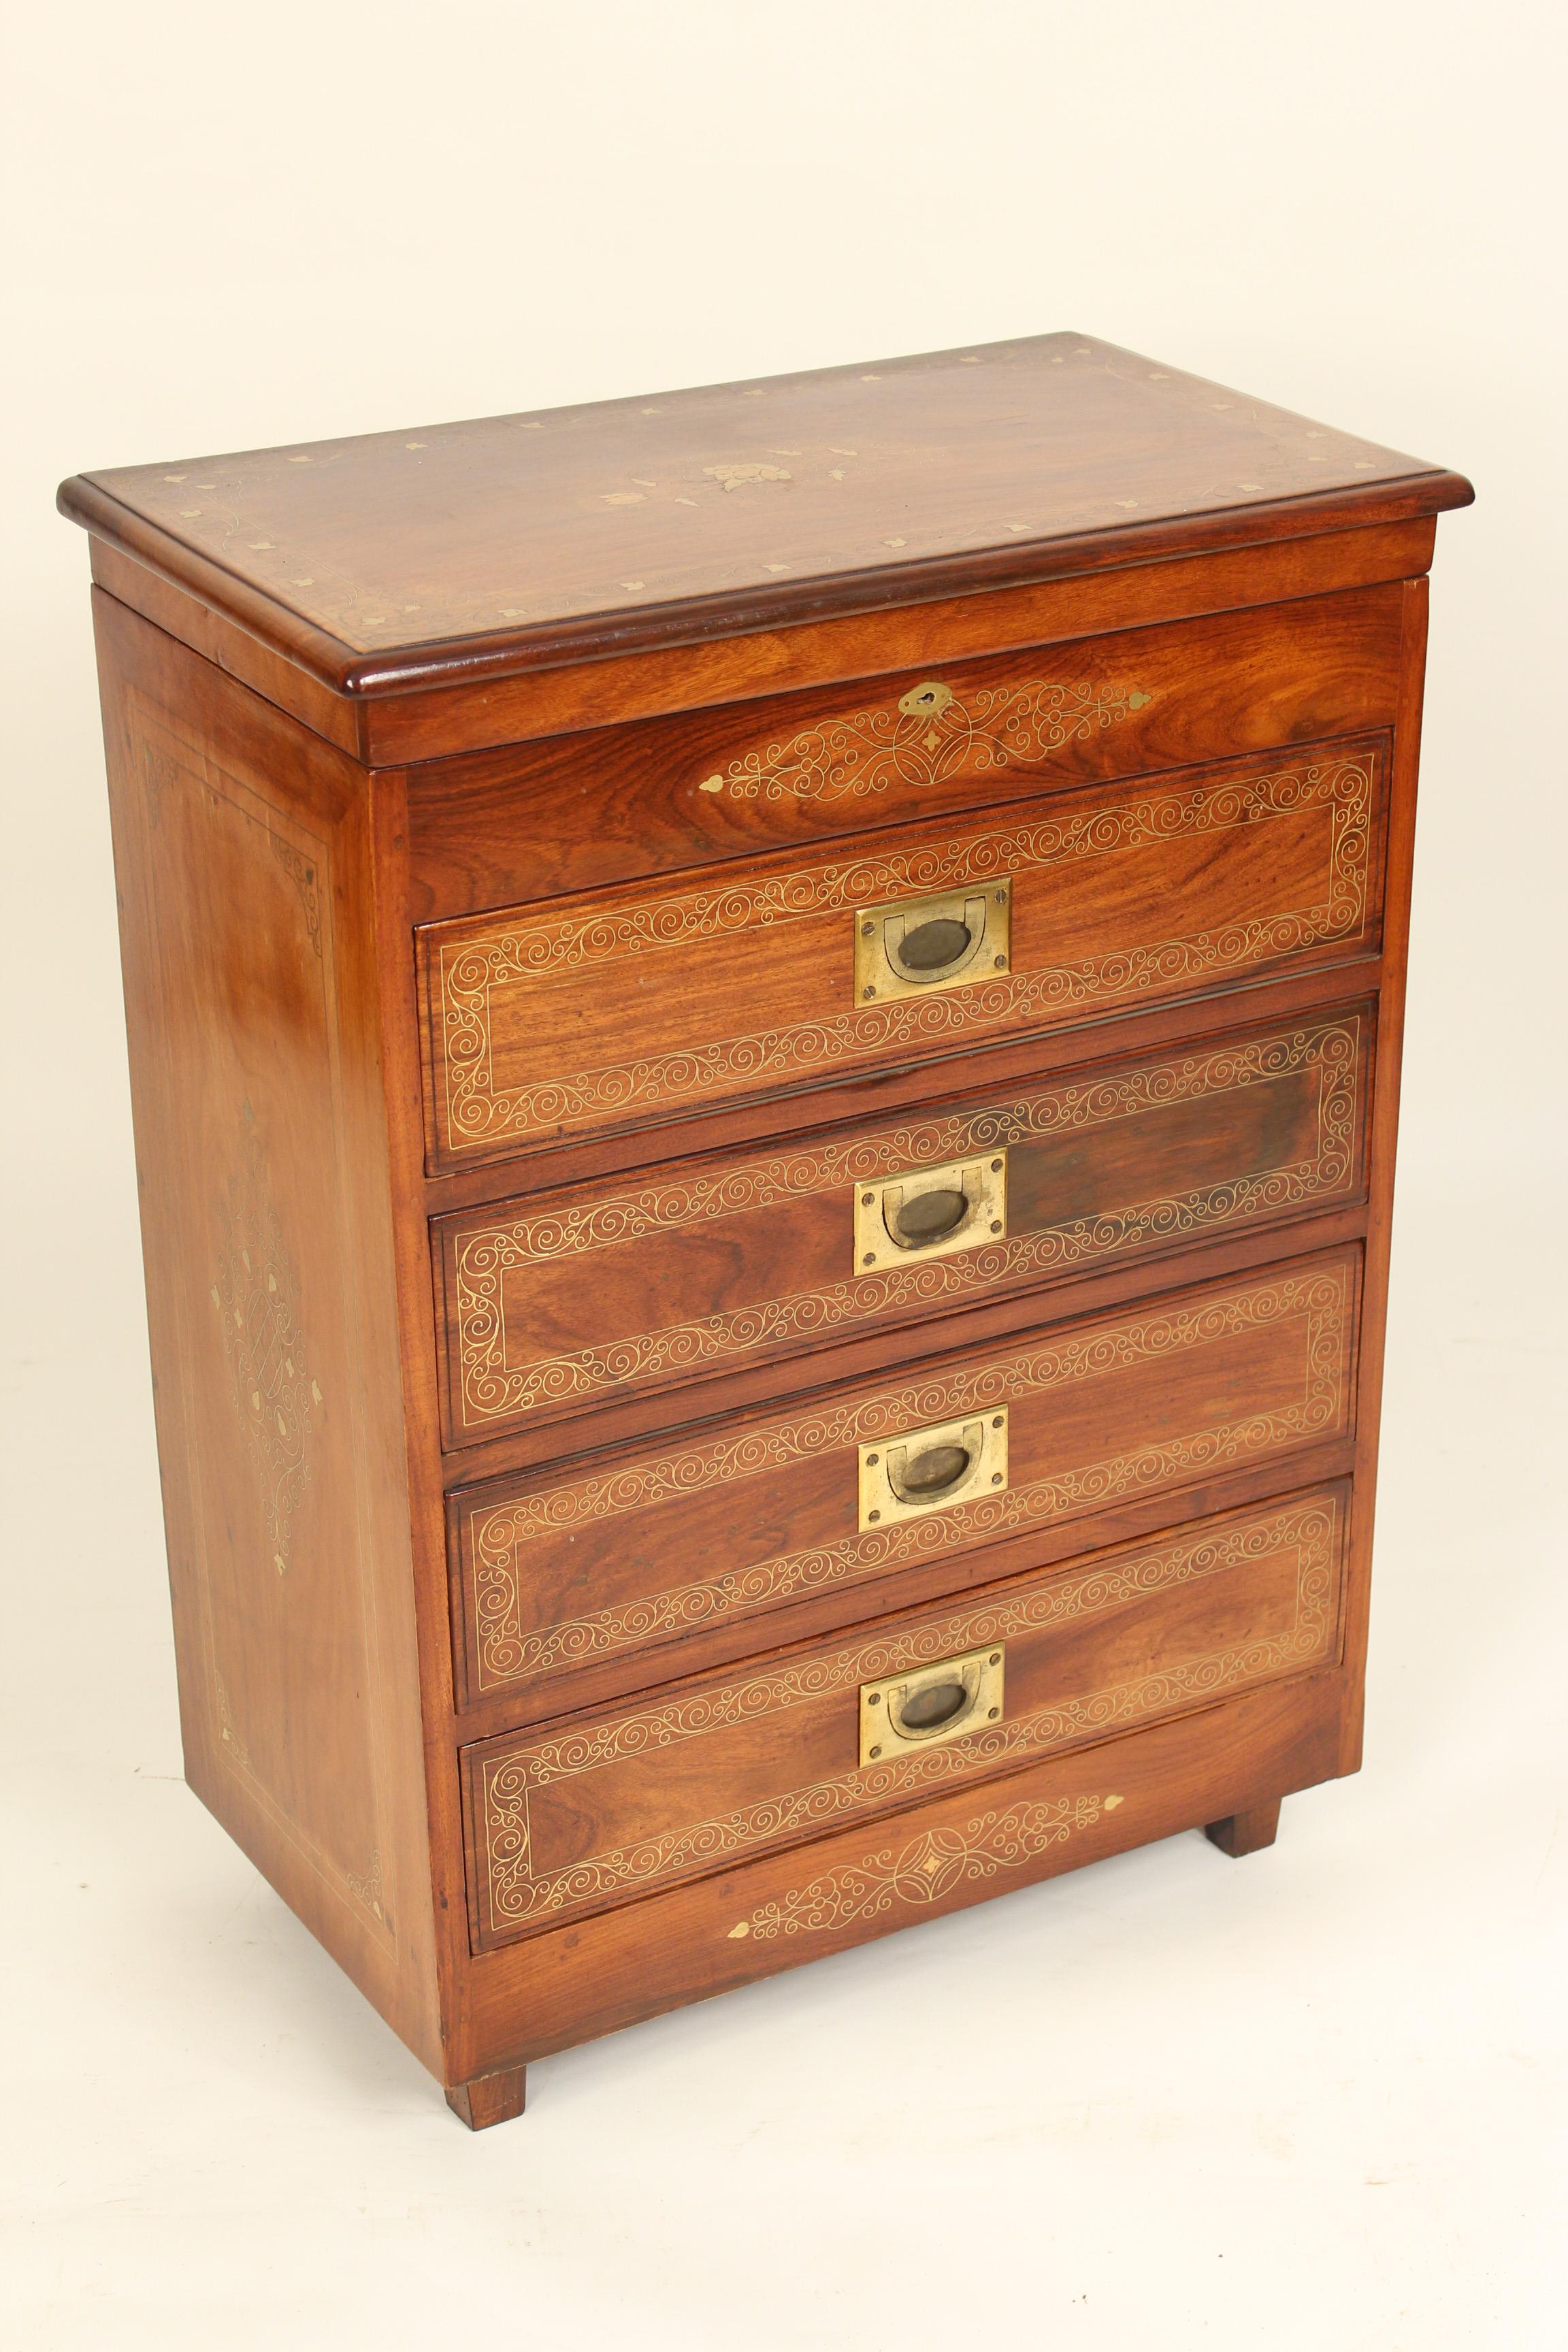 Pair of Campaign style rosewood chests of drawers with brass inlay, approximately 30 years old. Great workmanship on these chests of drawers with intricate brass inlay. The tops lift up on both chests of drawers. There are 2 depths for these chests,